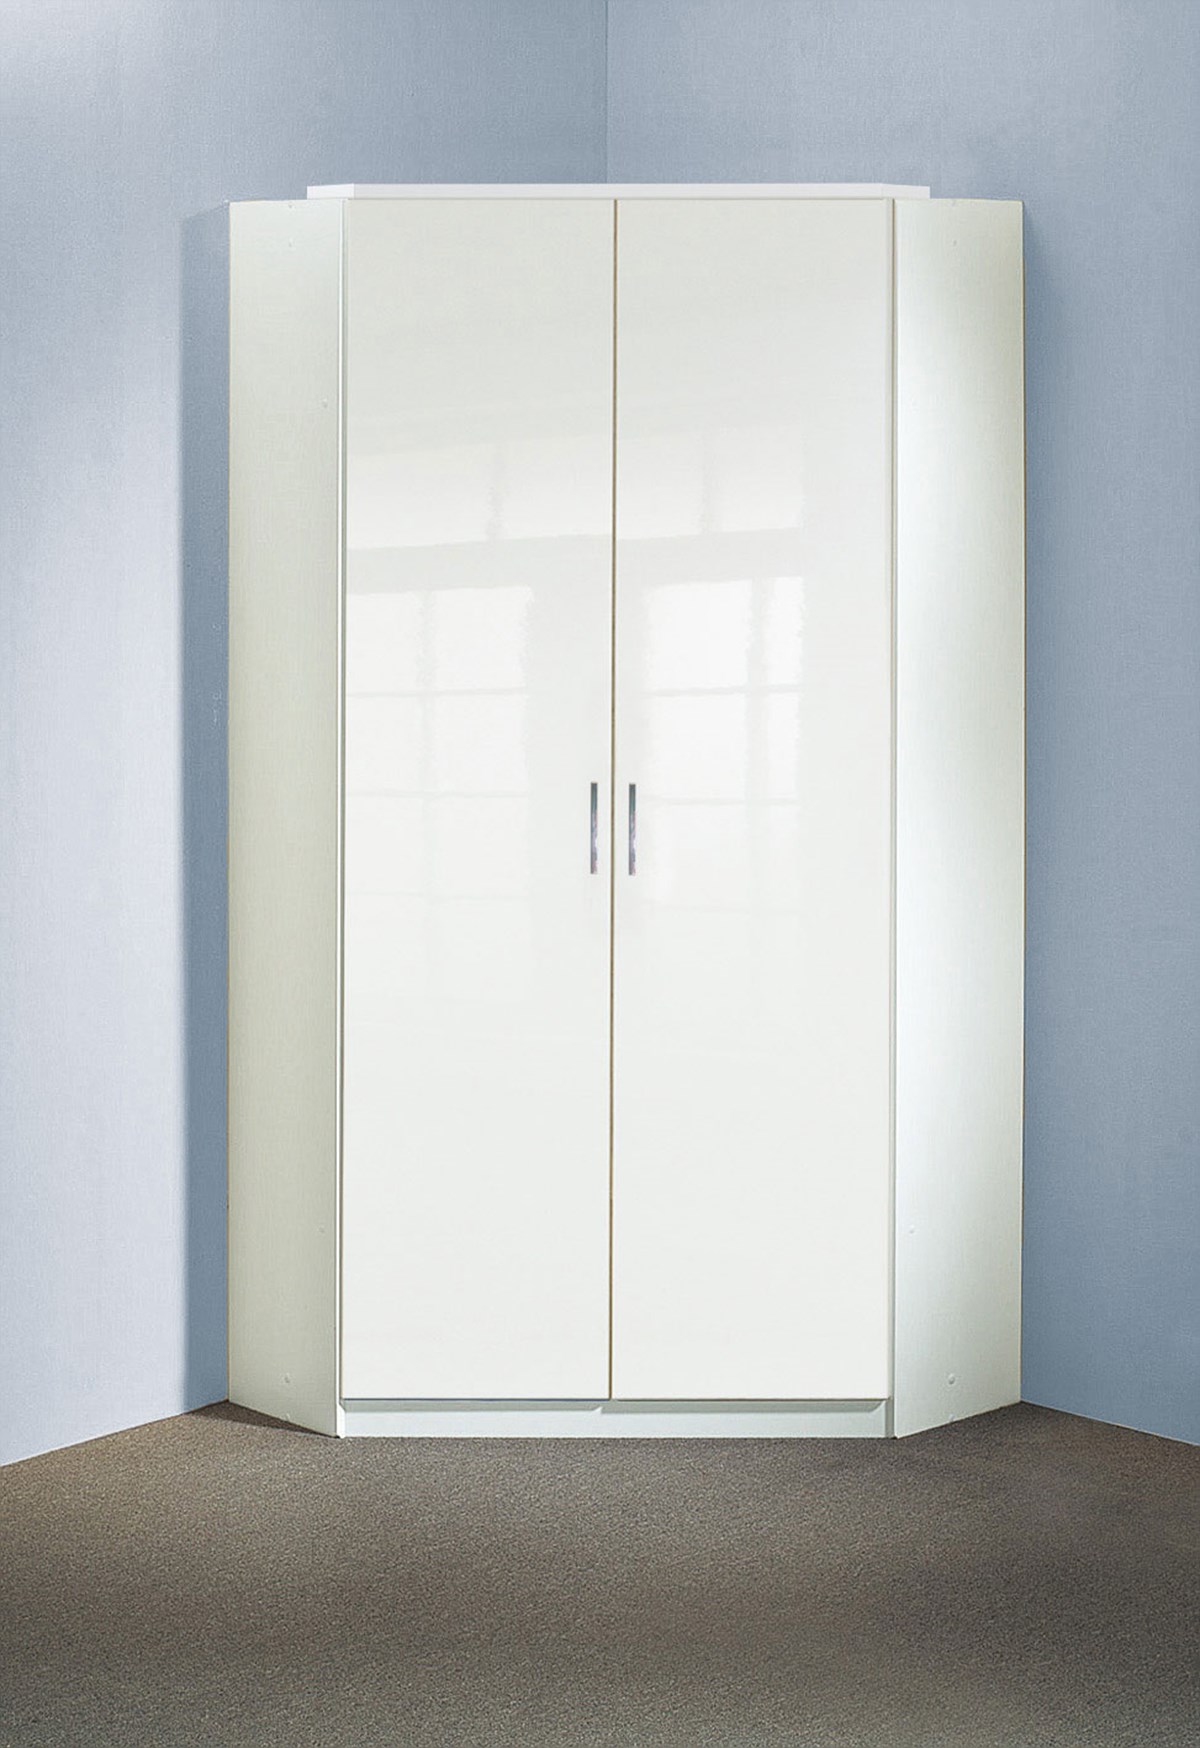 https://www.crack.be/PIMStorage/MainImage/Armoire-angle-coin-2-portes-Clack-laque-blanc-95cm-243-511-Wimex.jpg?mode=max&width=1200